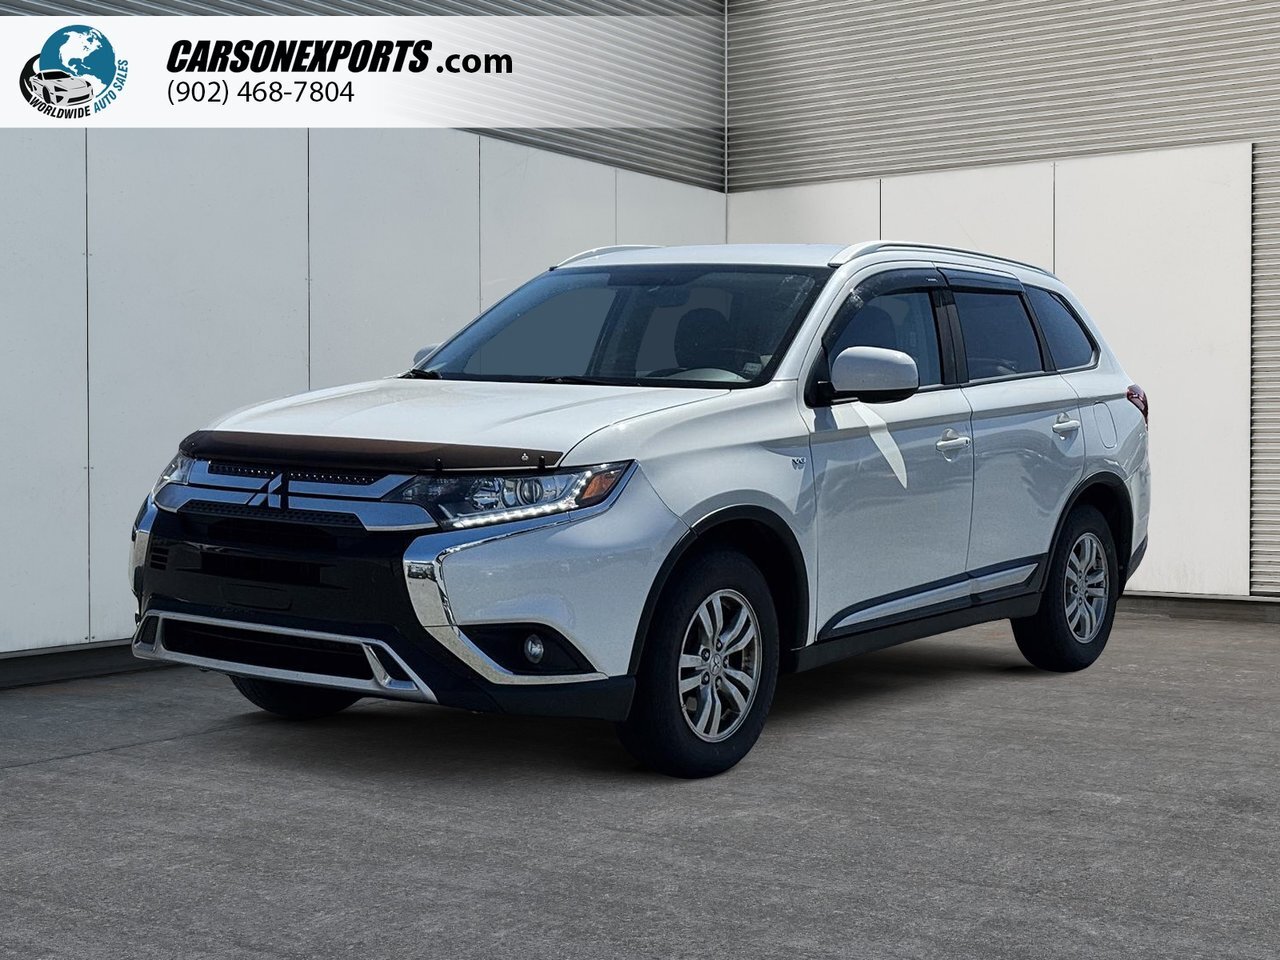 2019 Mitsubishi Outlander SE Black Edition The best place to buy a used car.